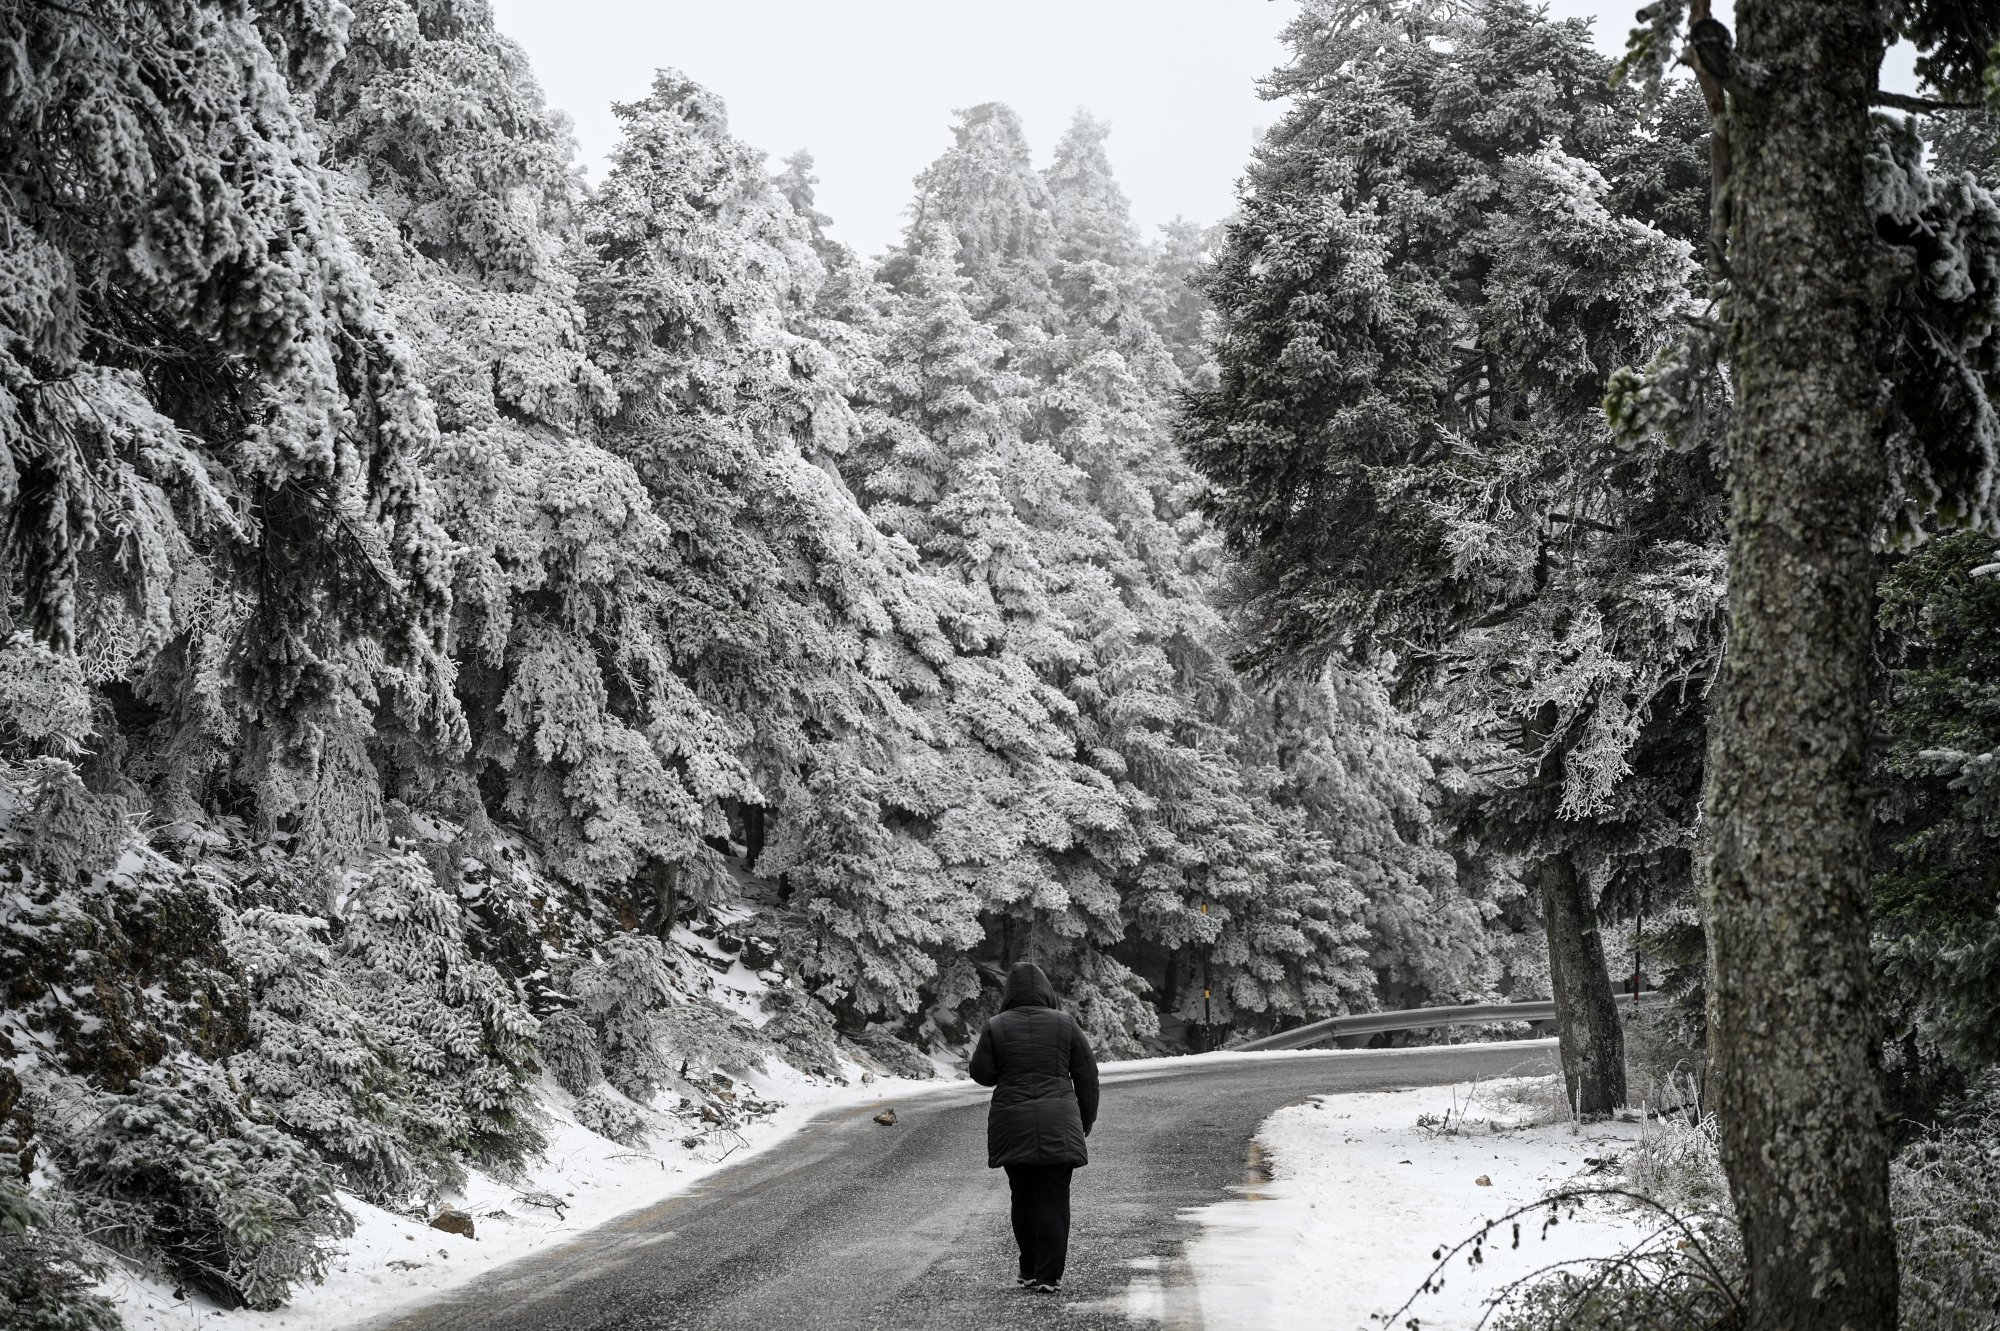 Rain and Snowfall Expected as Cold Front Descends on Greece